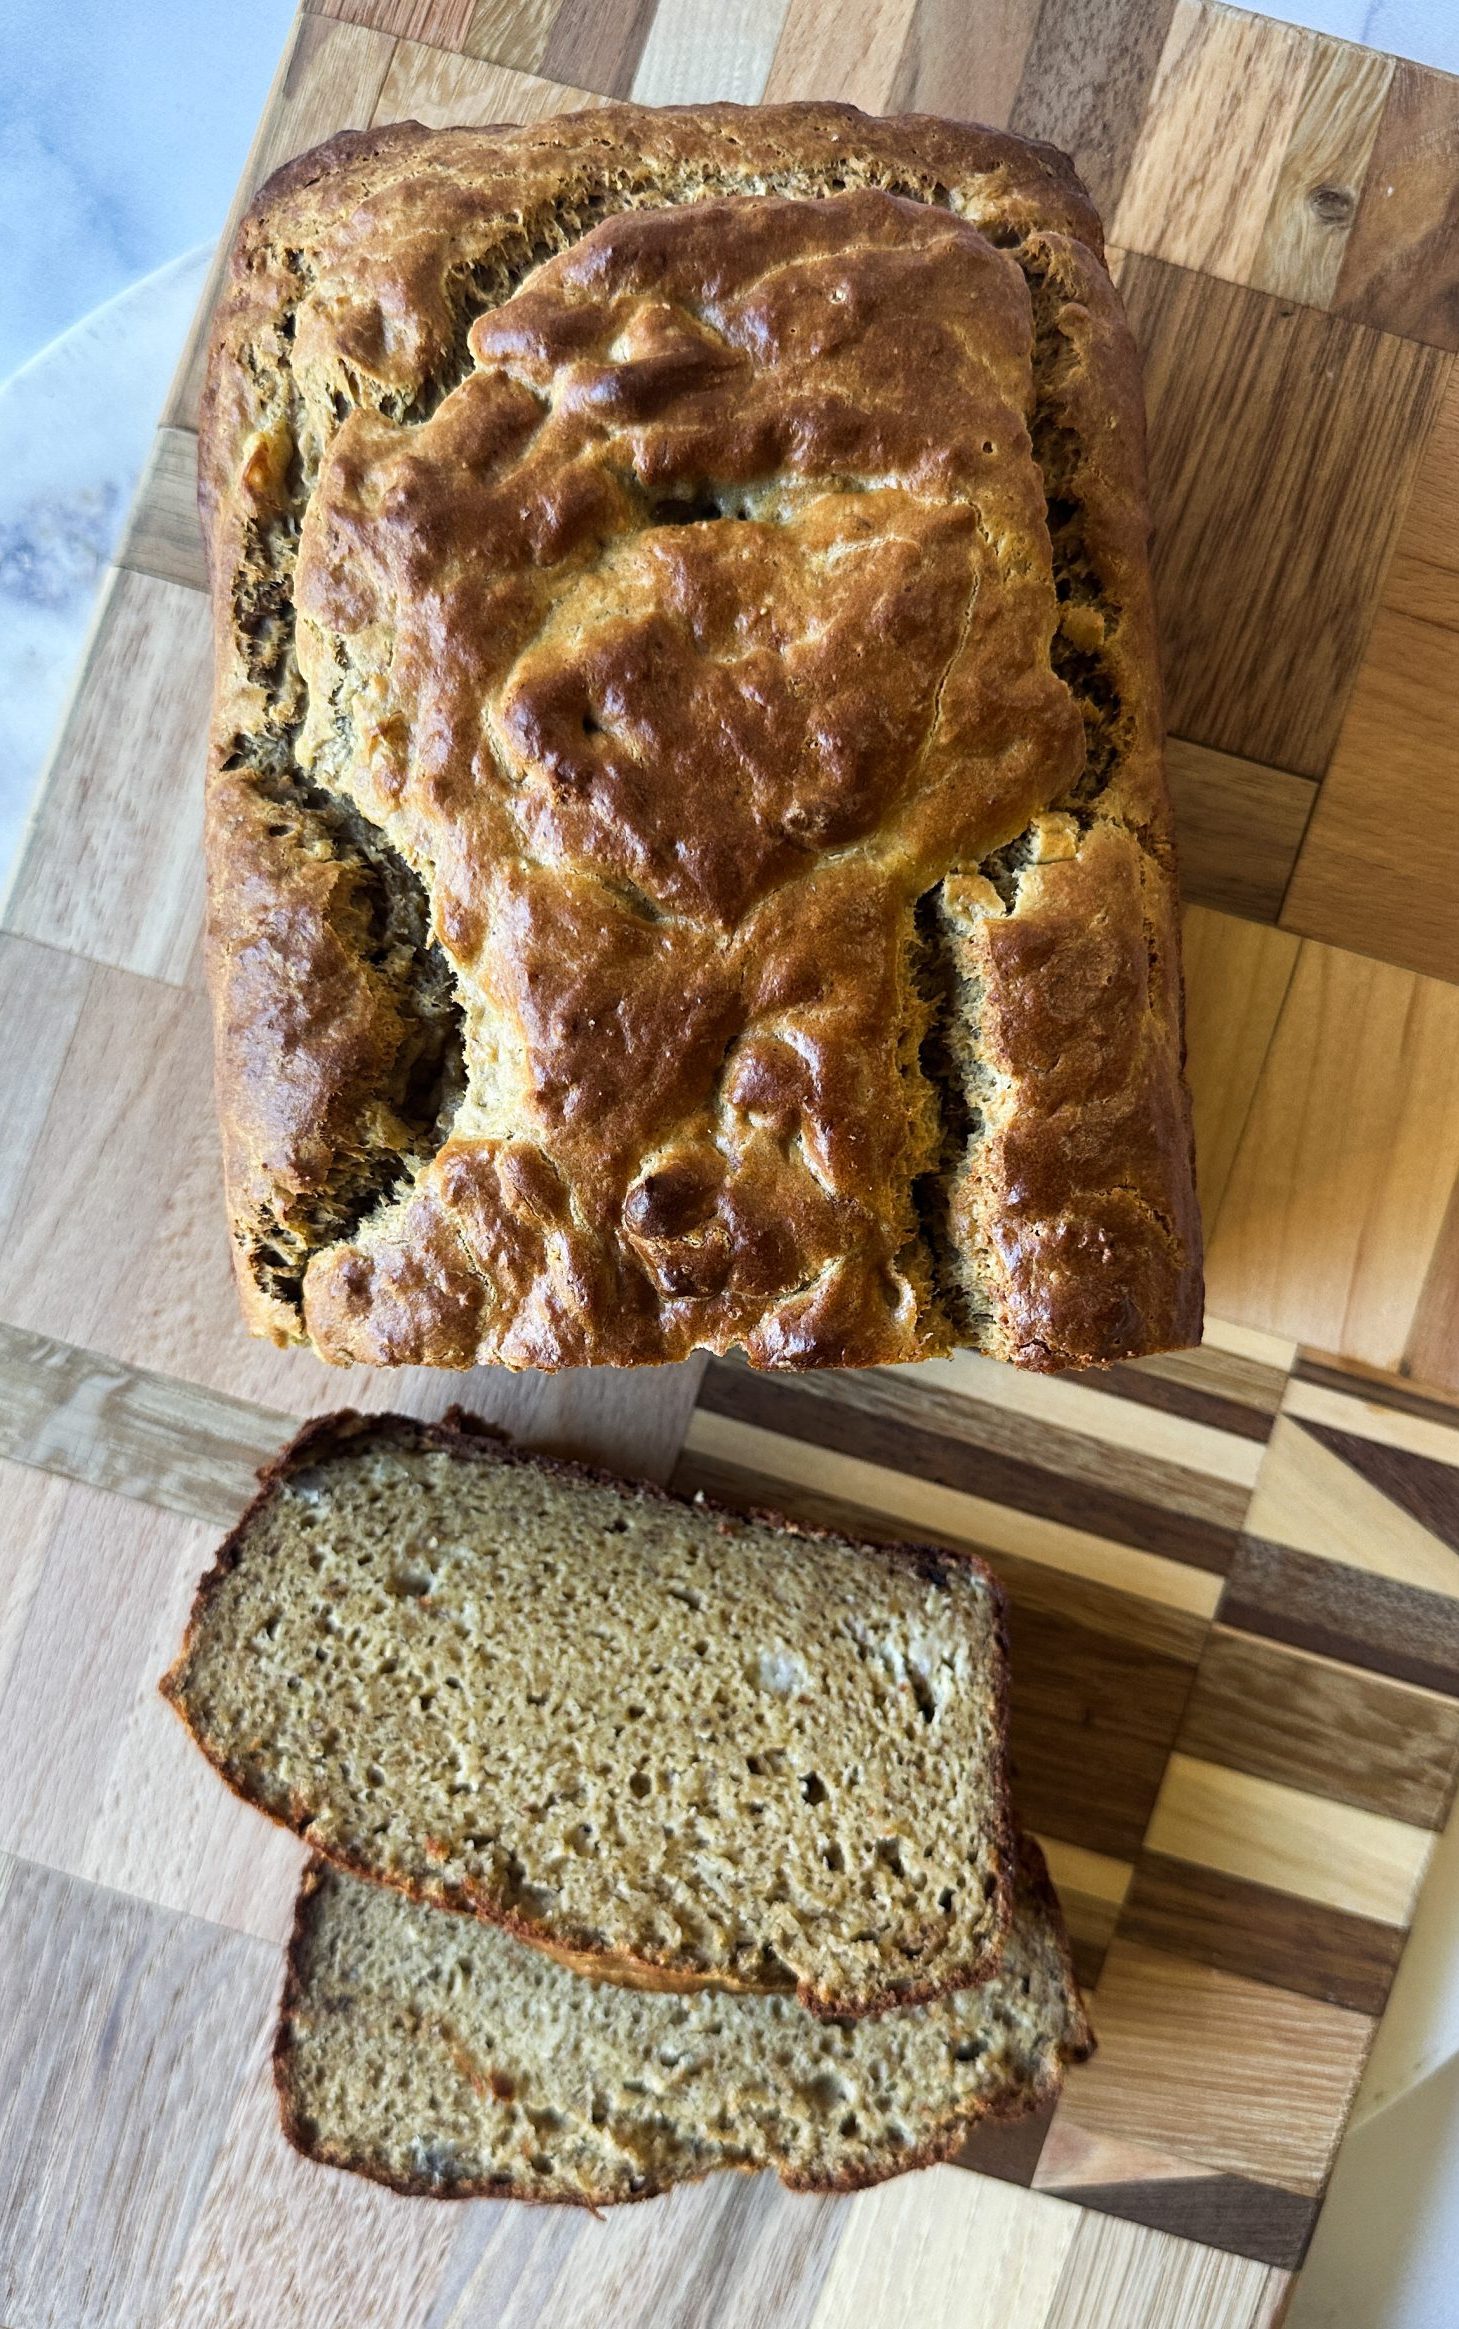 The Best Low Carb Banana Bread Recipe- nut free and gluten free